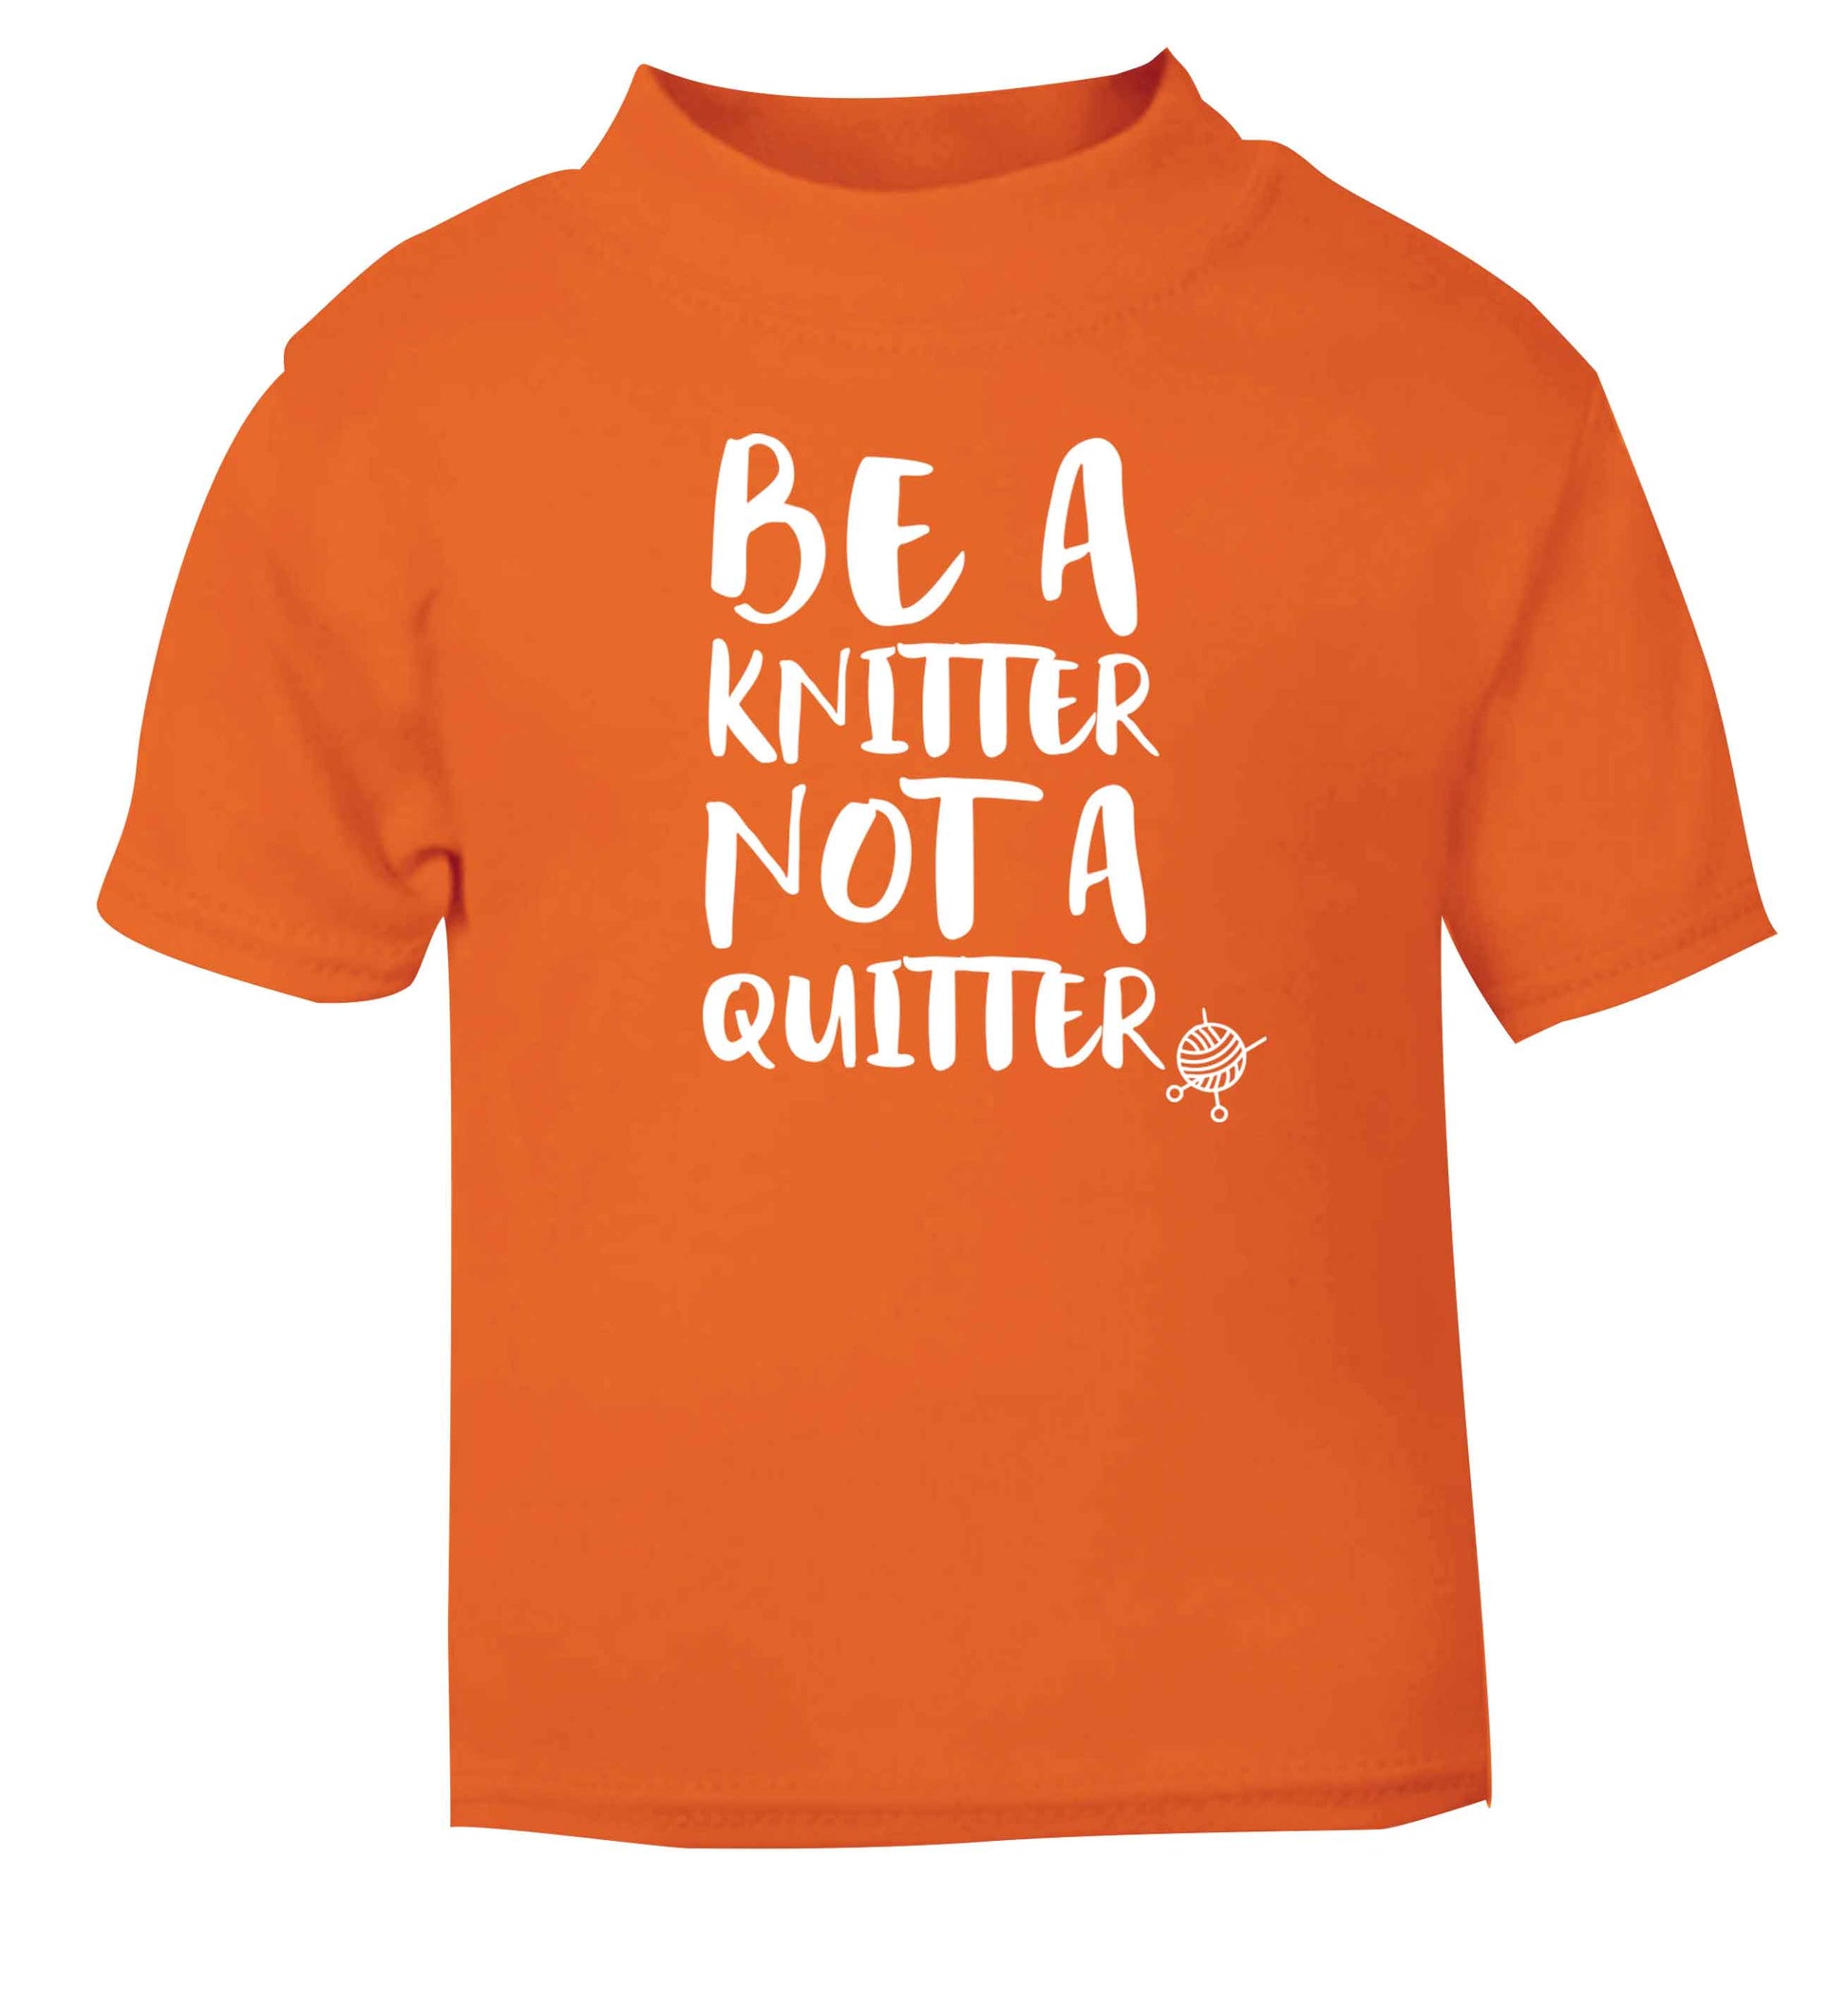 Be a knitter not a quitter orange Baby Toddler Tshirt 2 Years